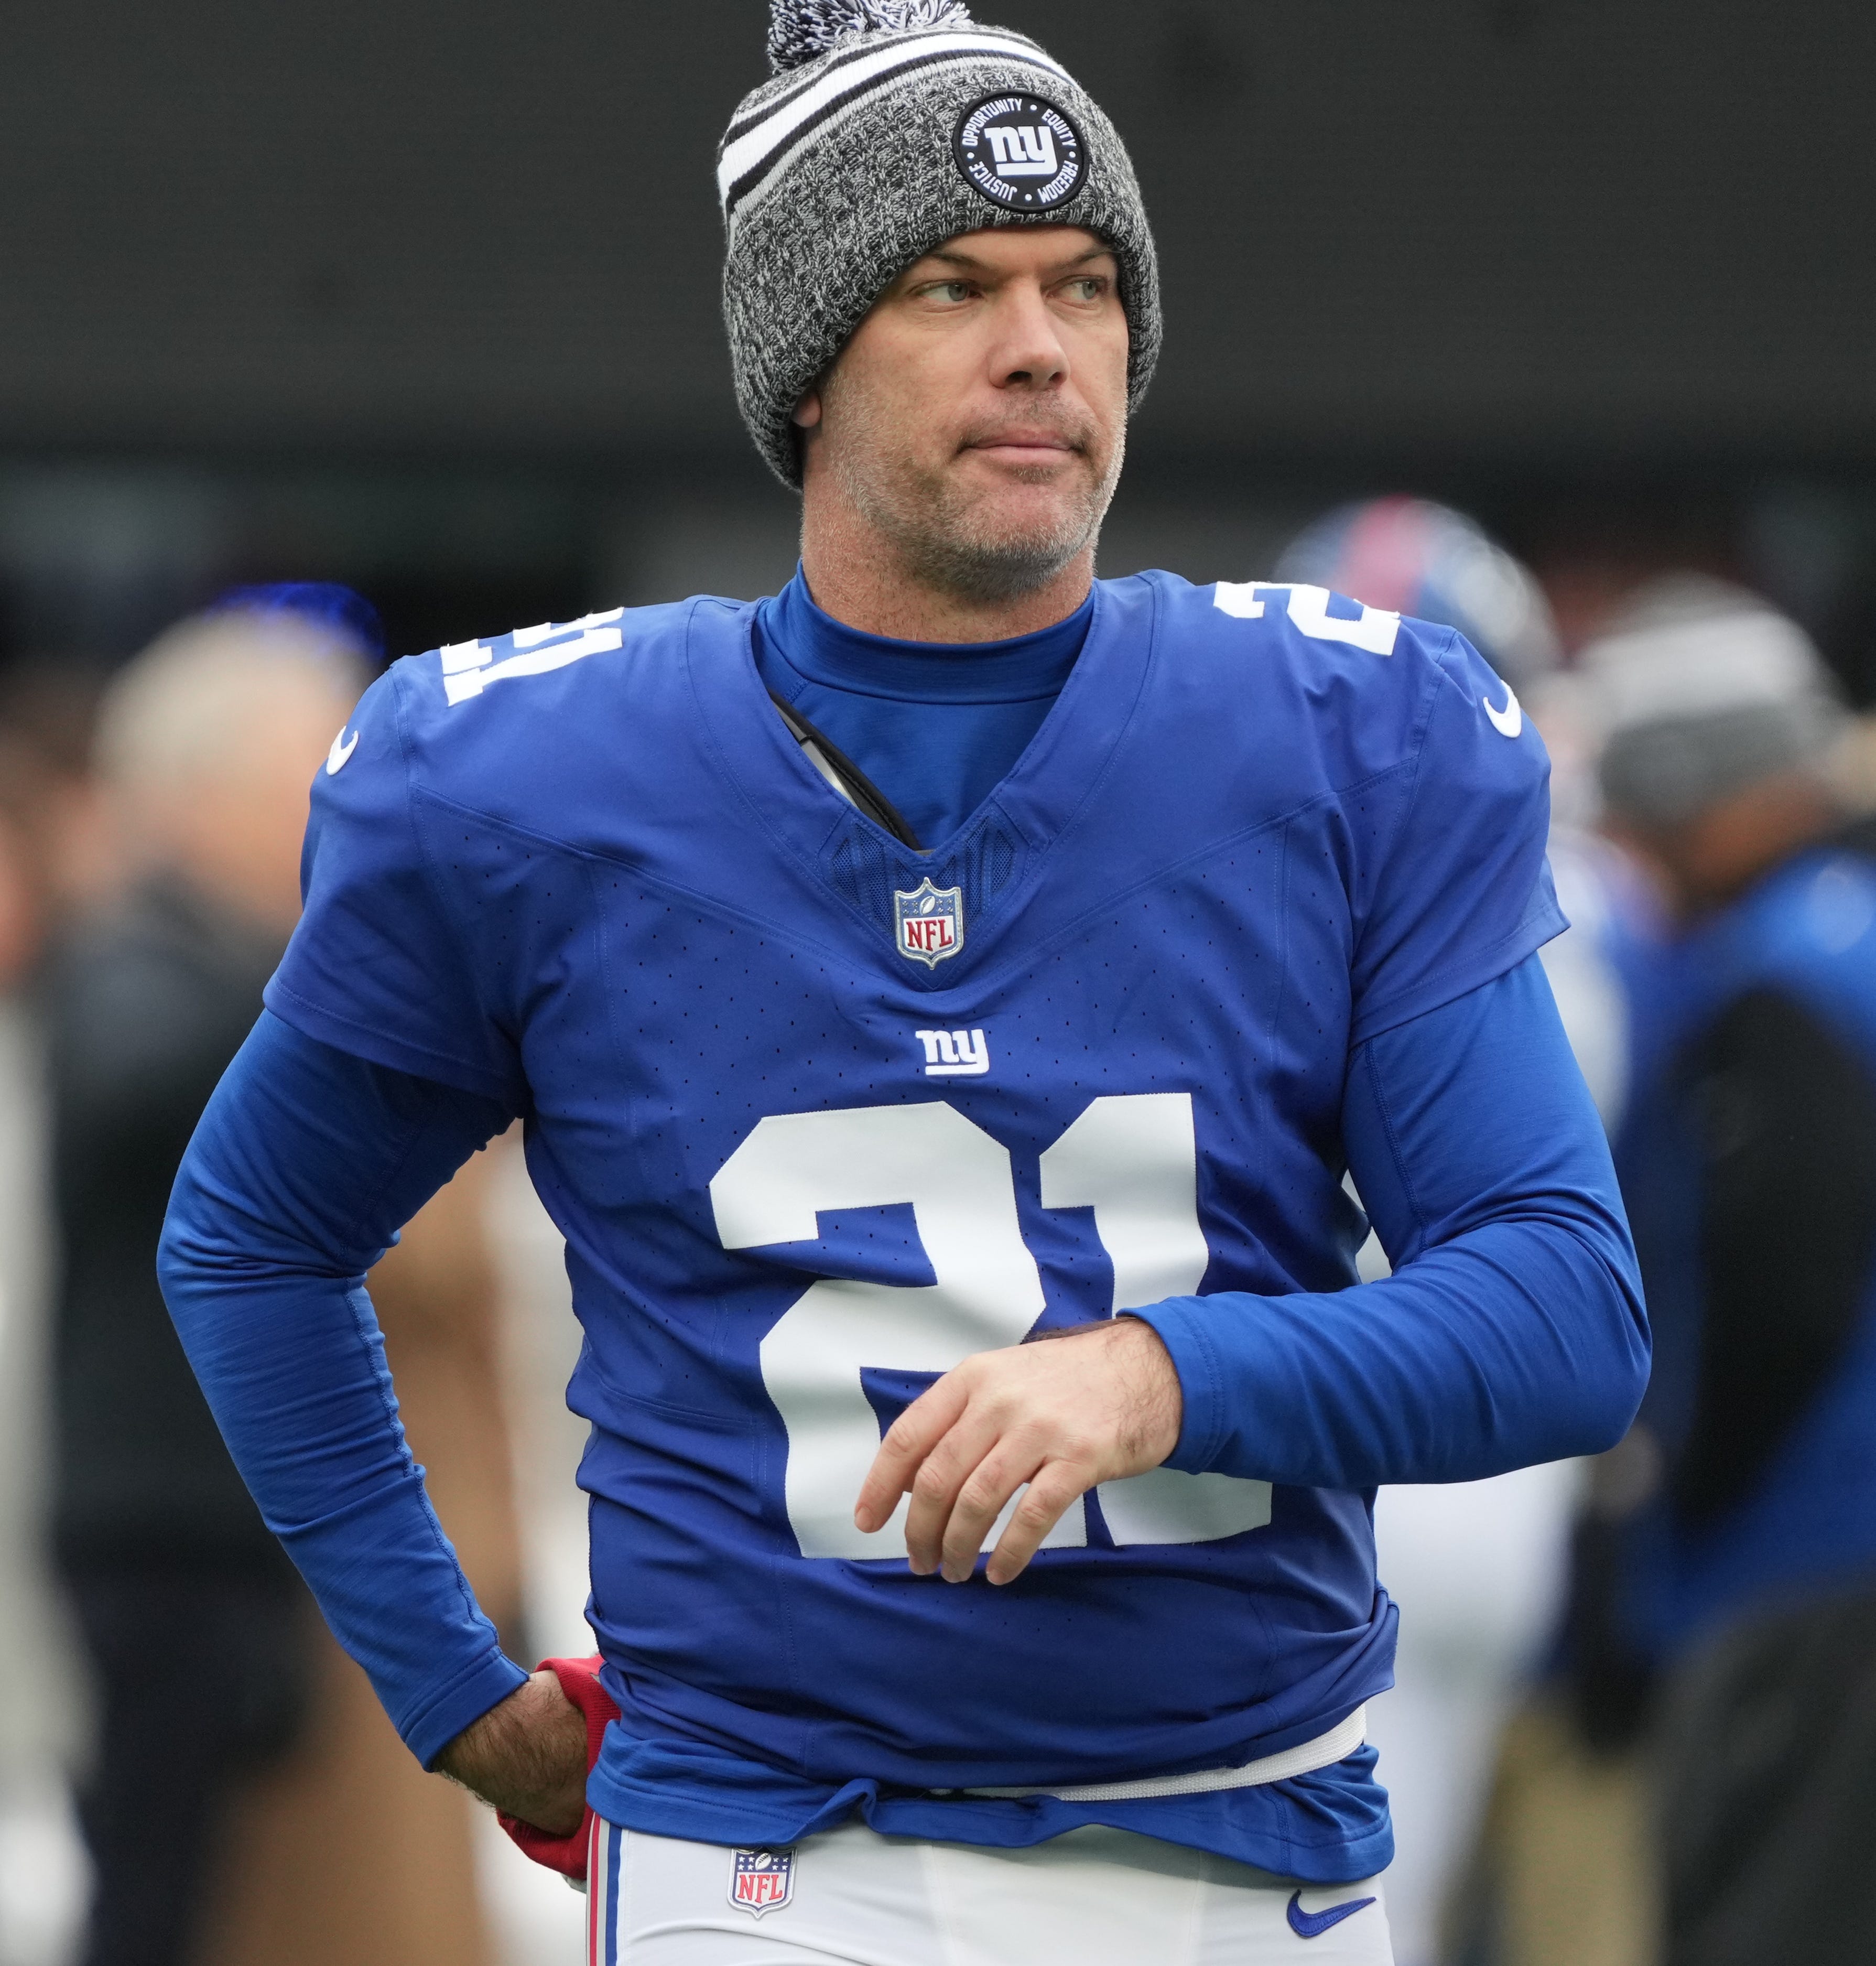 Former Green Bay Packers kicker Mason Crosby missed a late go-ahead field goal for the New York Giants against the Los Angeles Rams on Sunday.